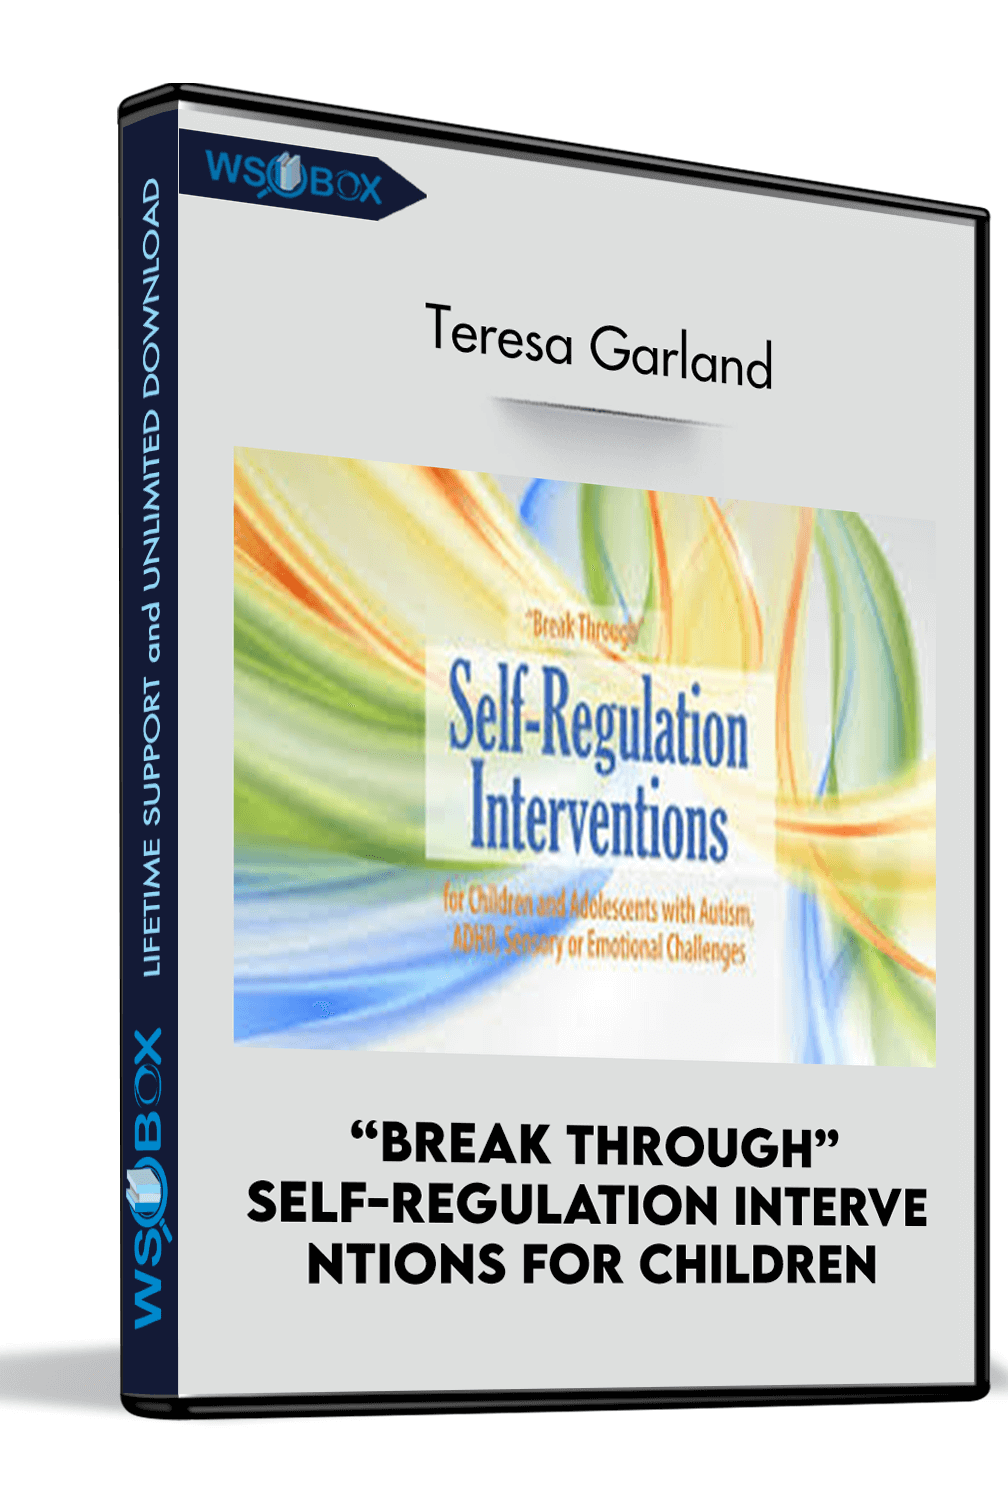 “Break Through” Self-Regulation Interve ntions for Children and Adolescents with Autism, ADHD, Sensory or Emotional Challenges – Teresa Garland